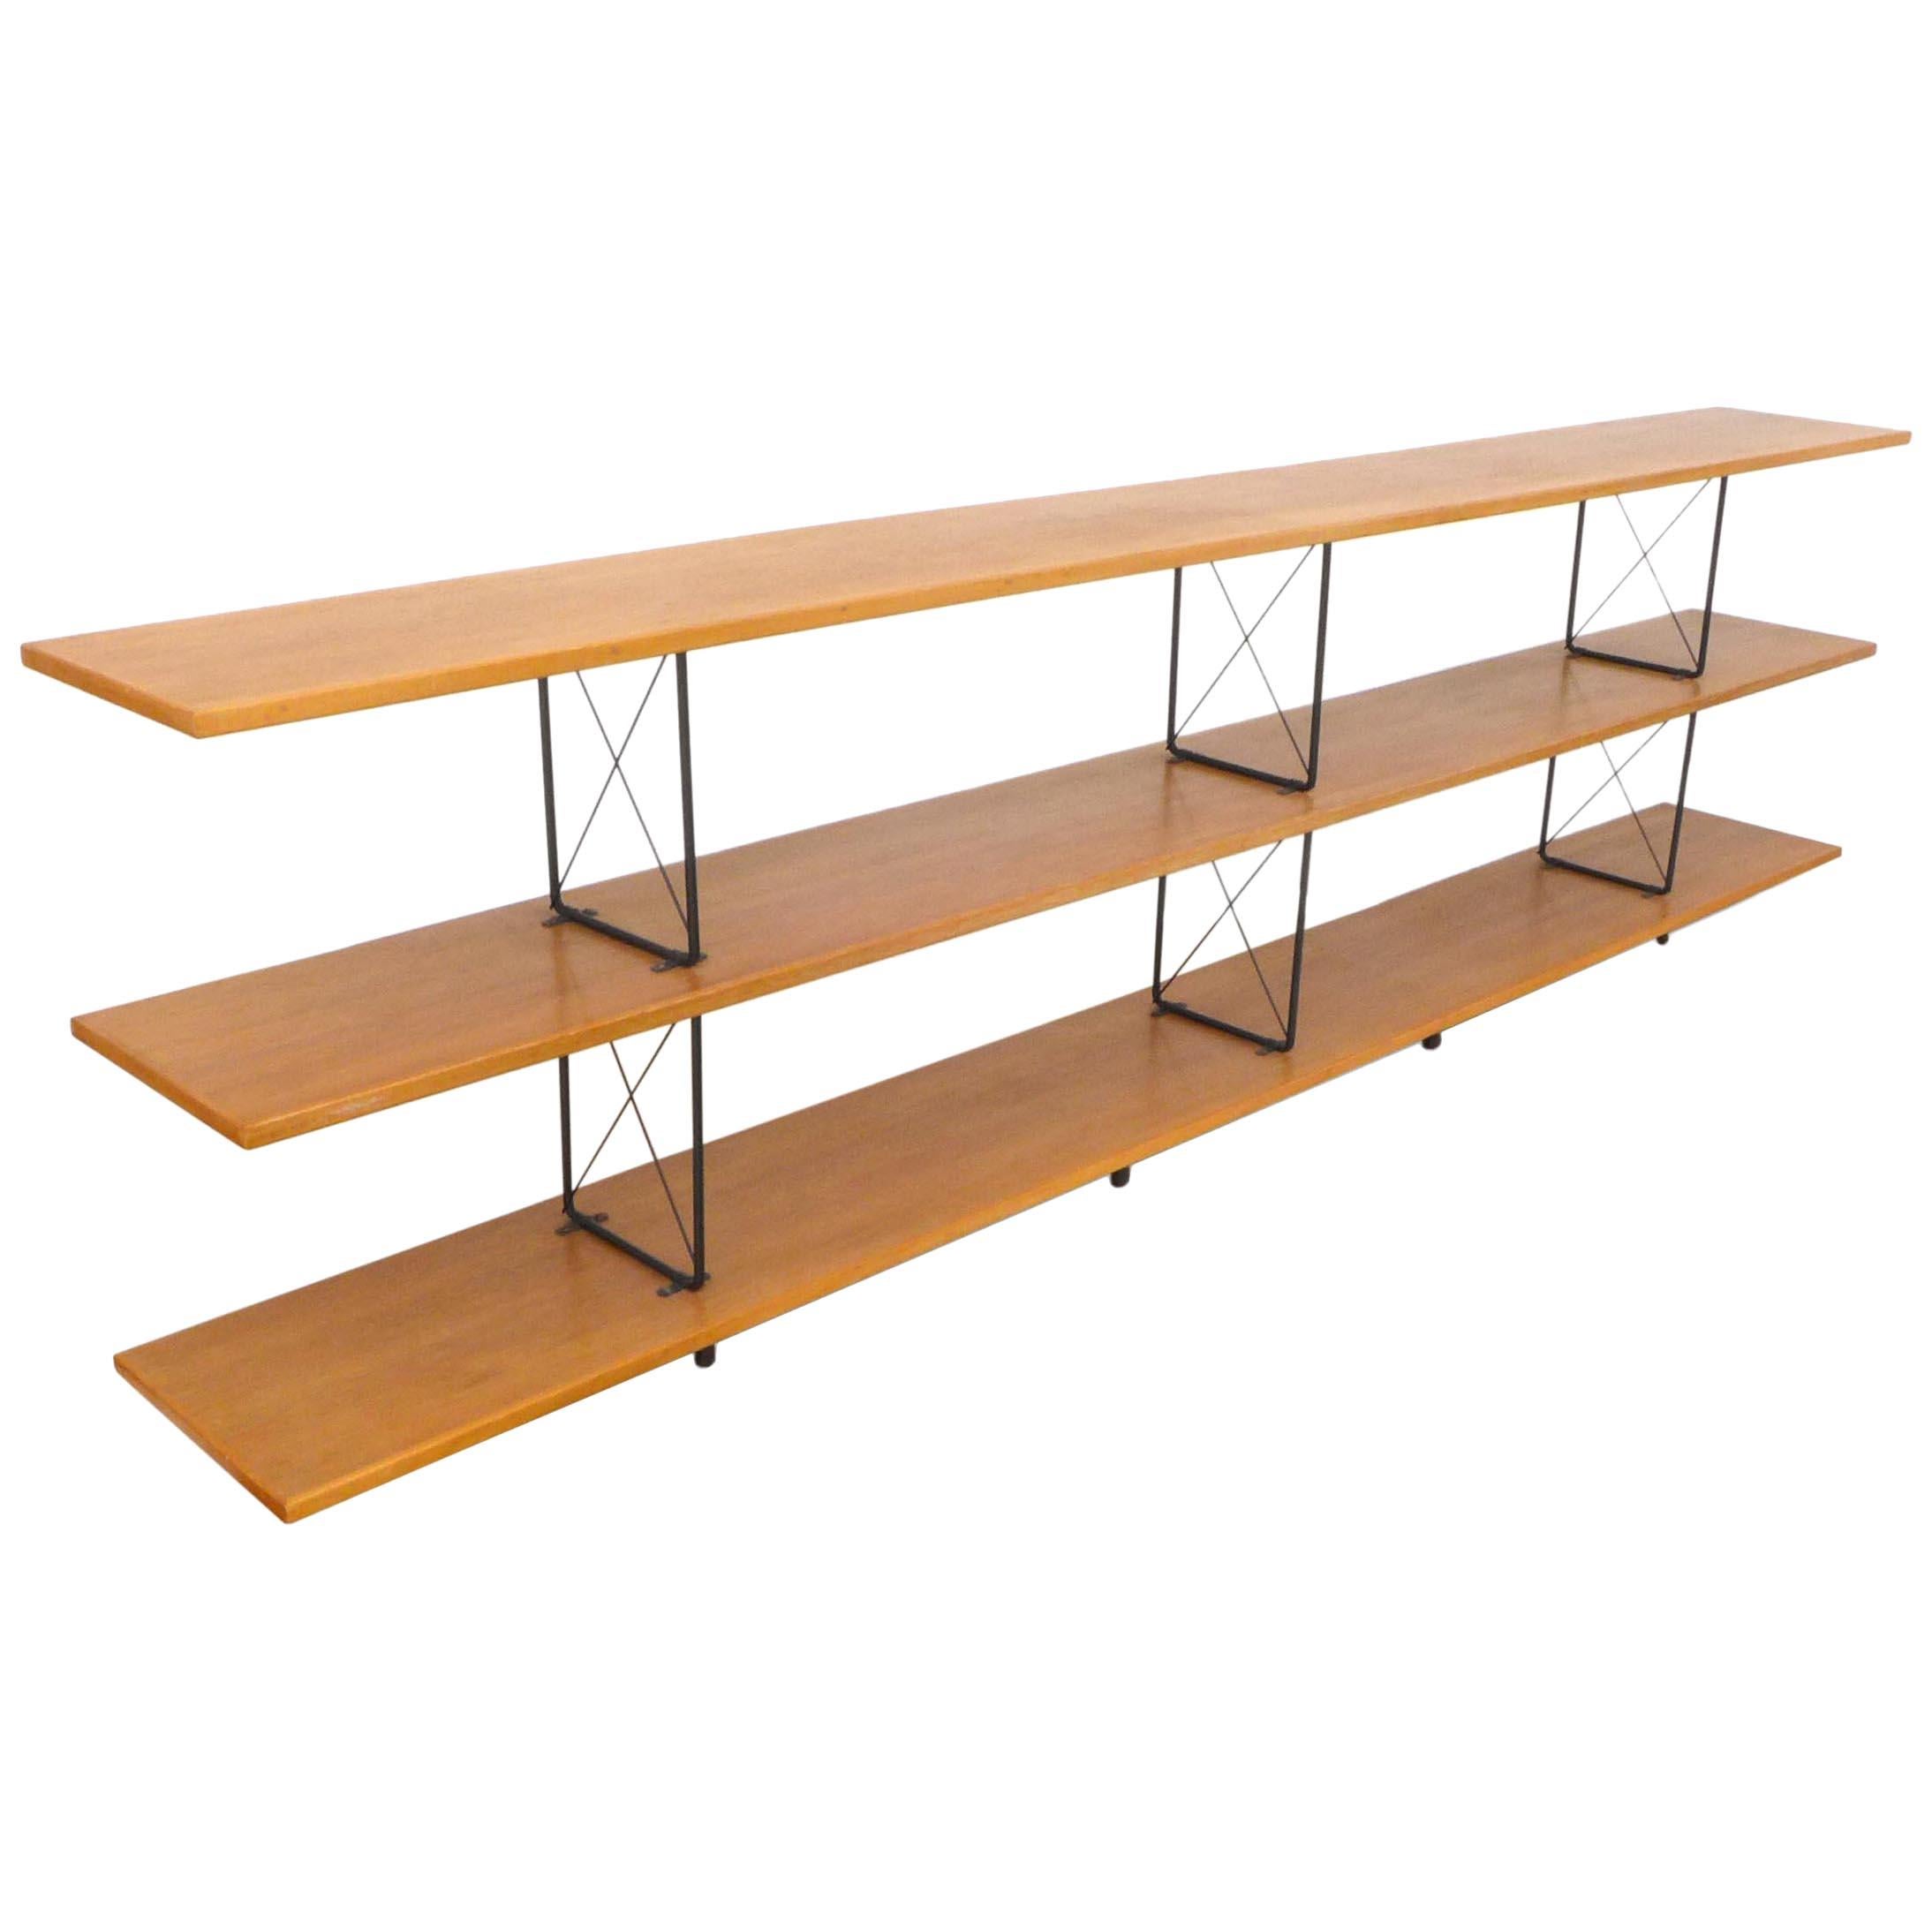 American Midcentury D.I.Y. Wood and Iron Shelving Unit For Sale